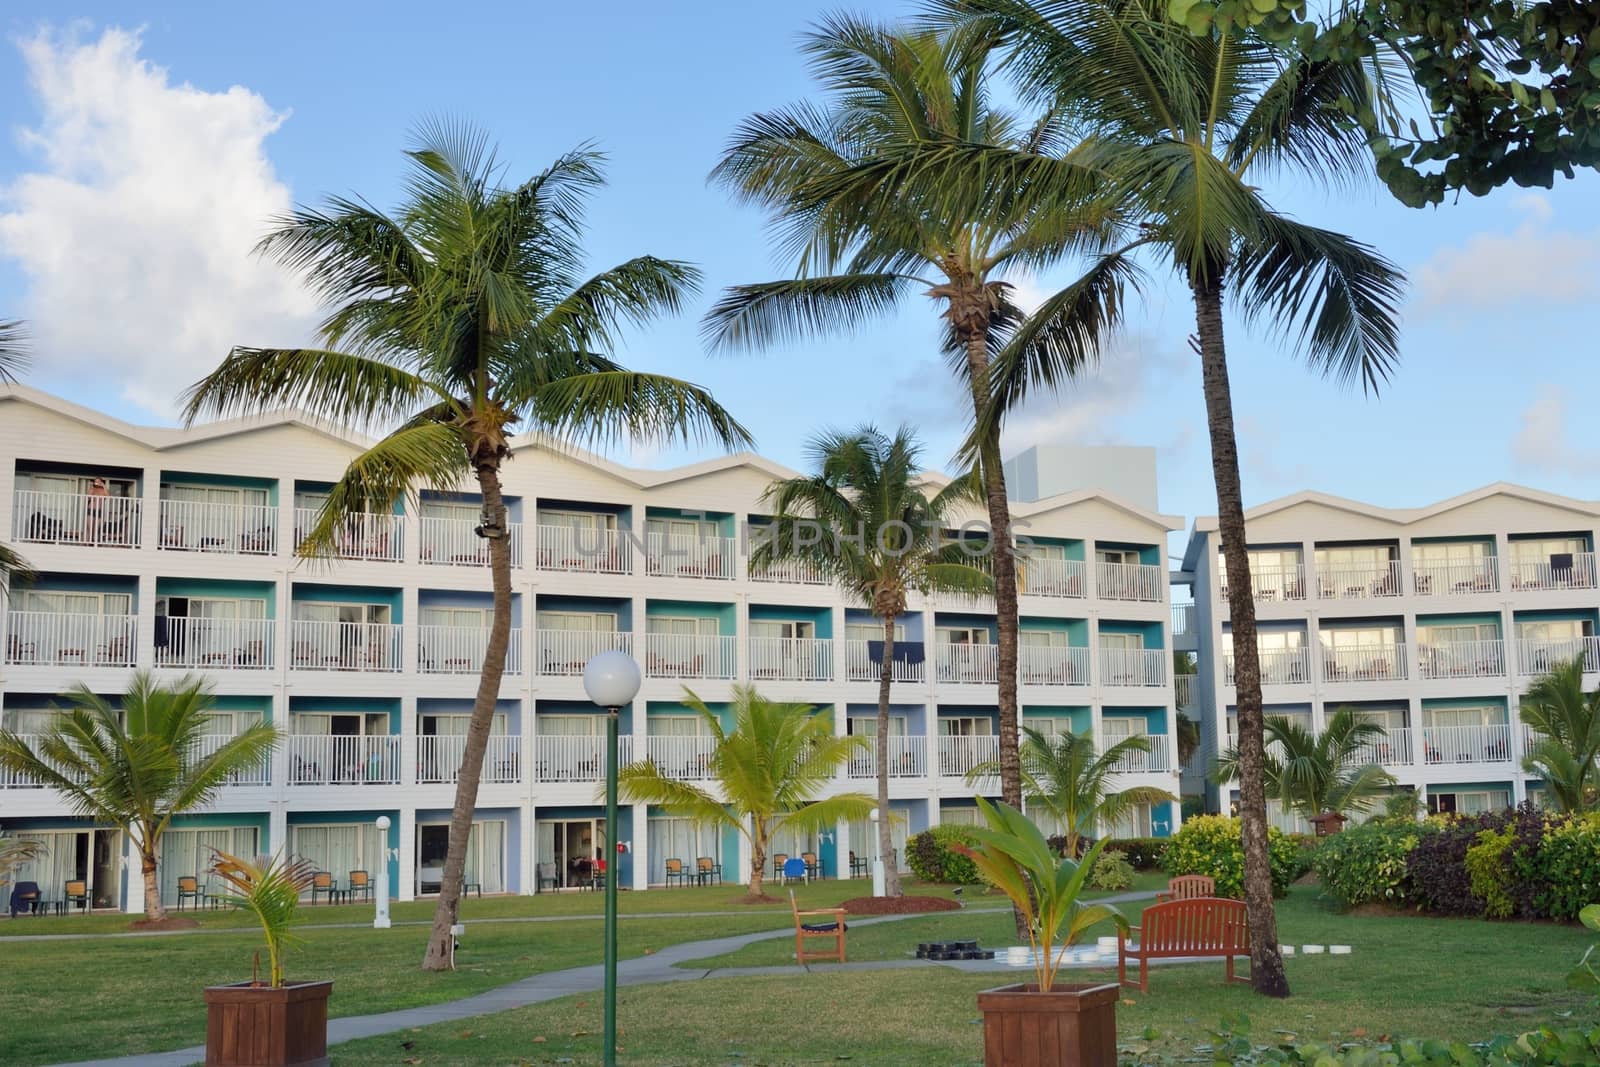 Caribbean large hotel with trees